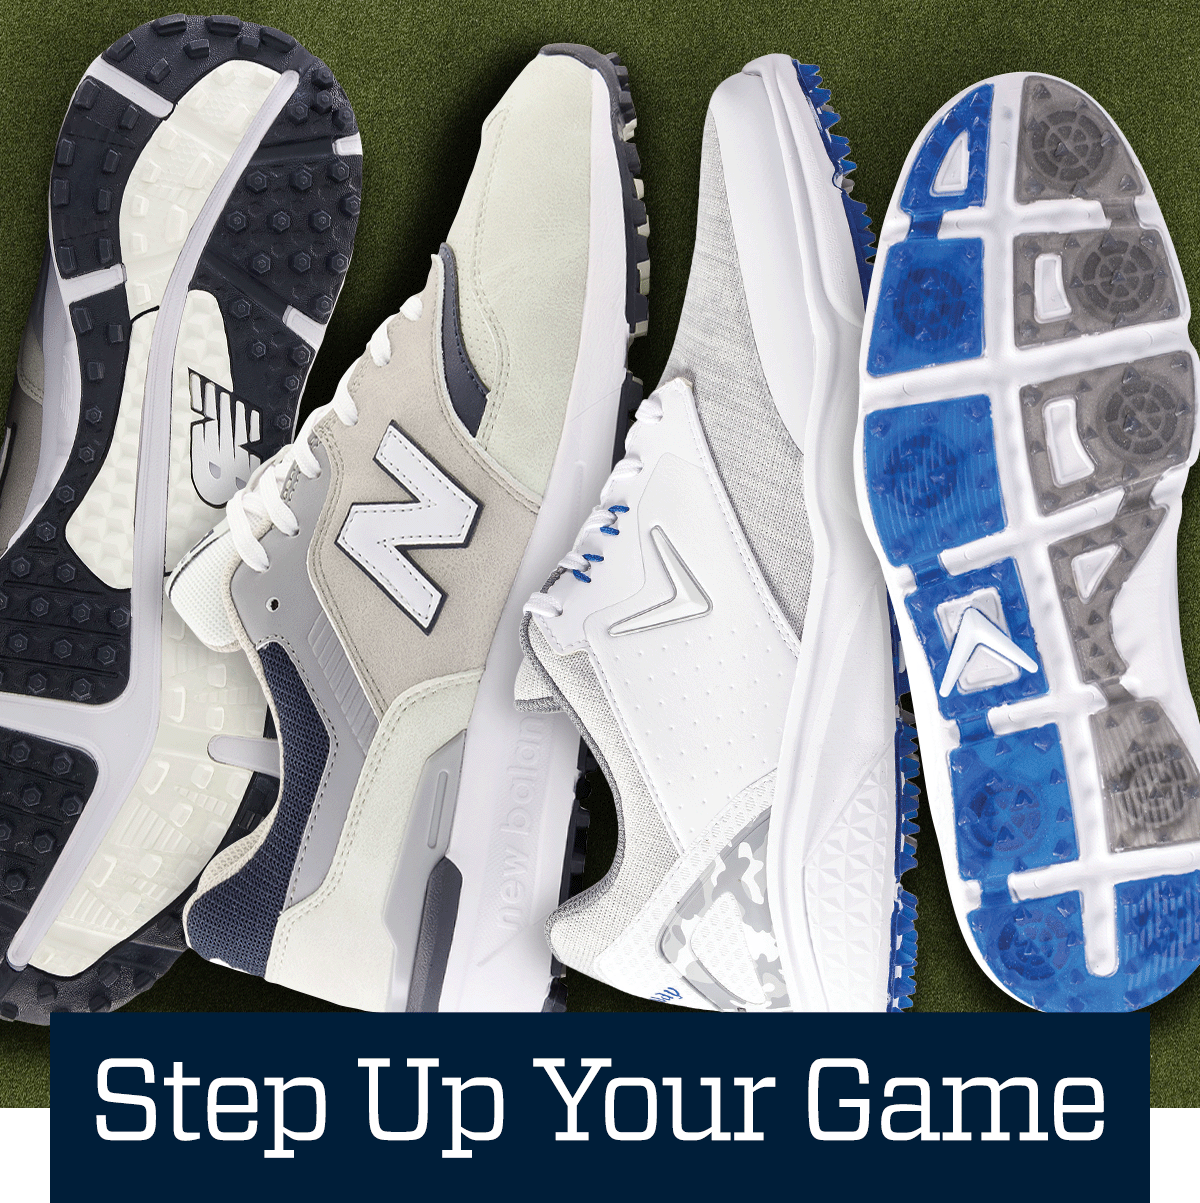 Step up your game.